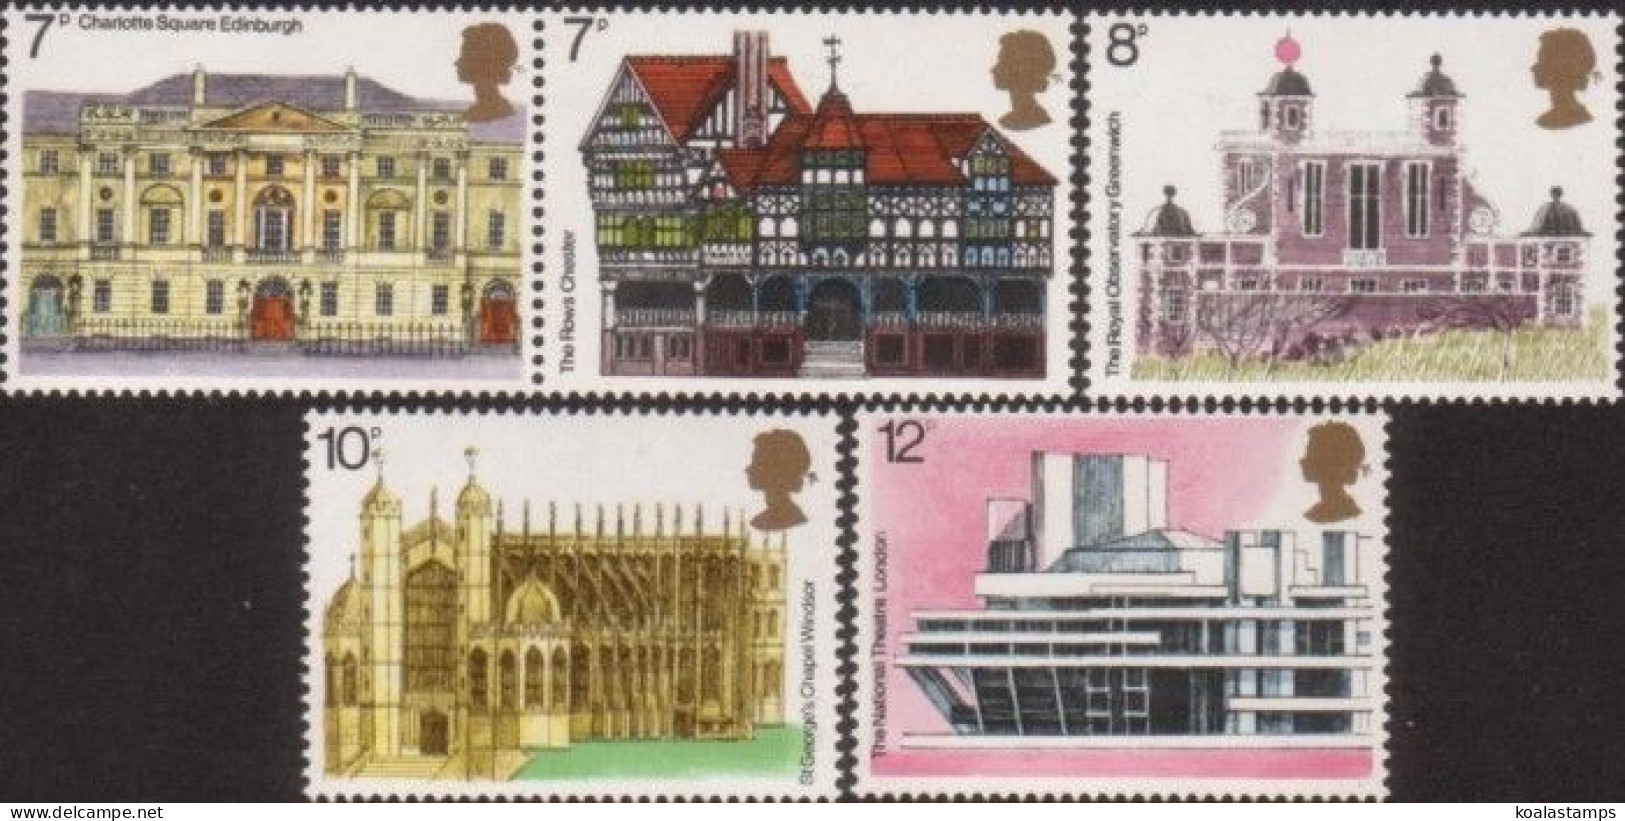 Great Britain 1975 SG975-979 Buildings Set MNH - Unclassified